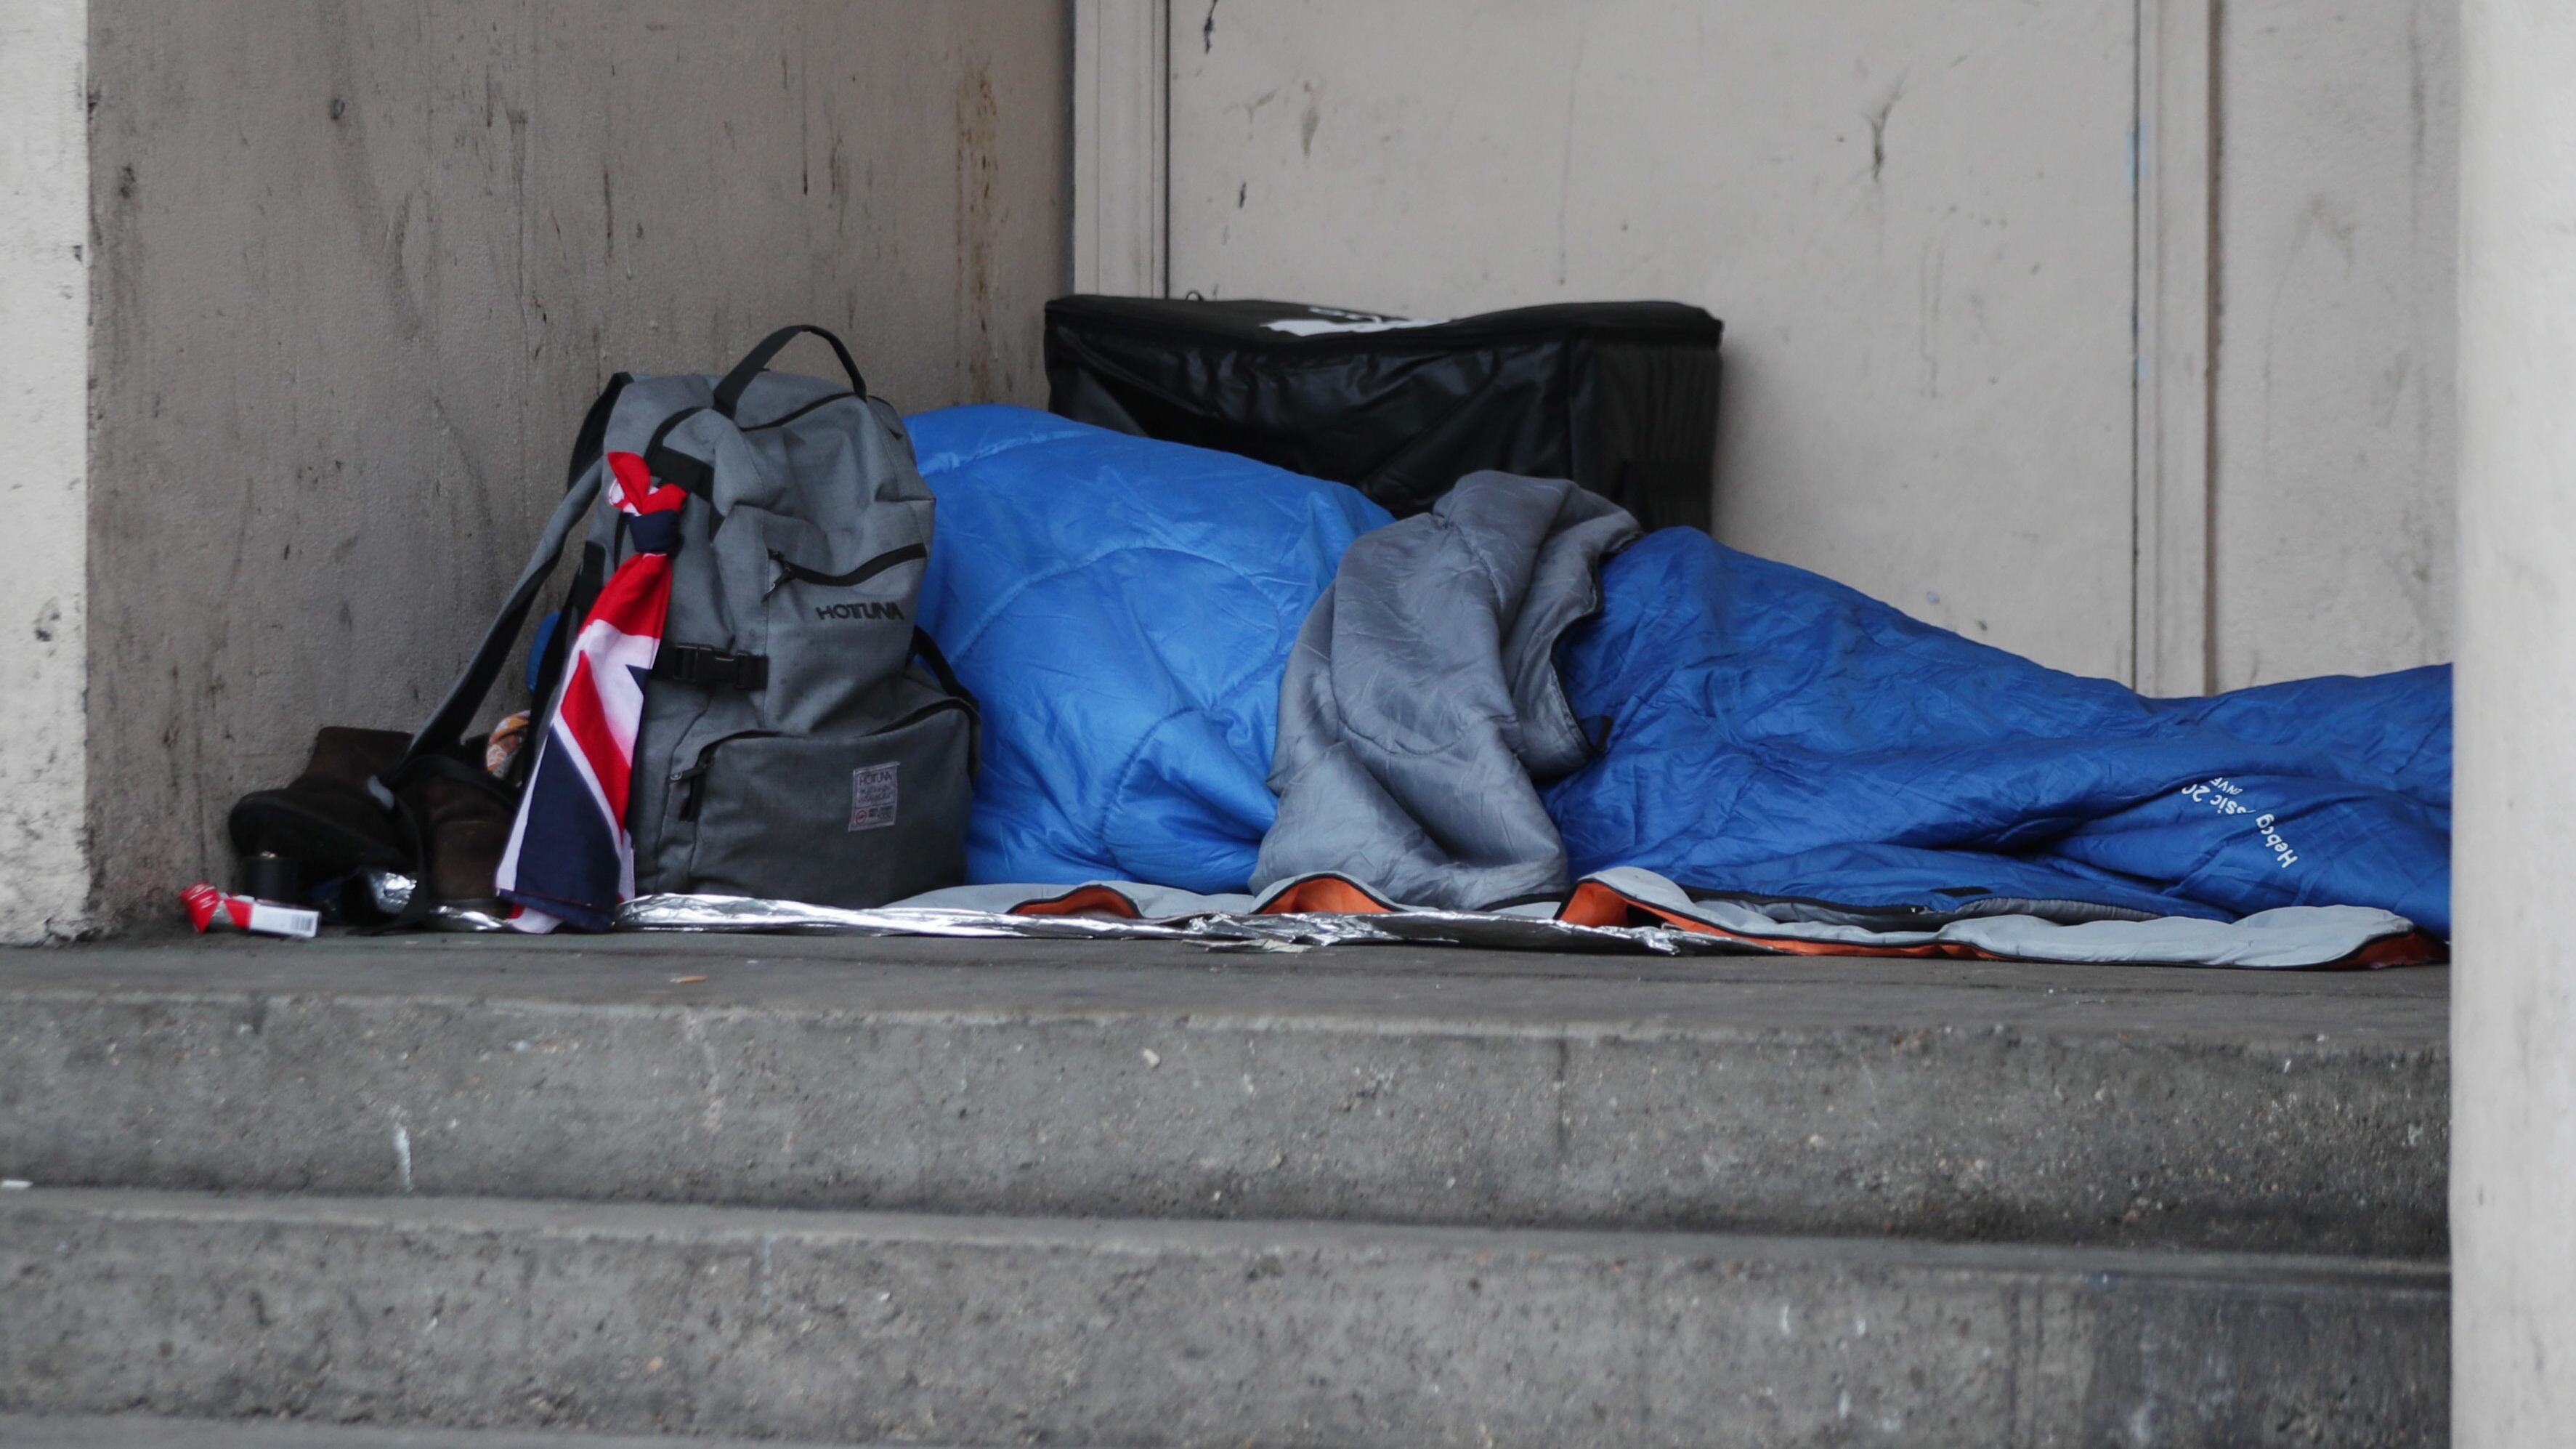 The Conservative Government had pledged to end rough sleeping by the end of this parliament